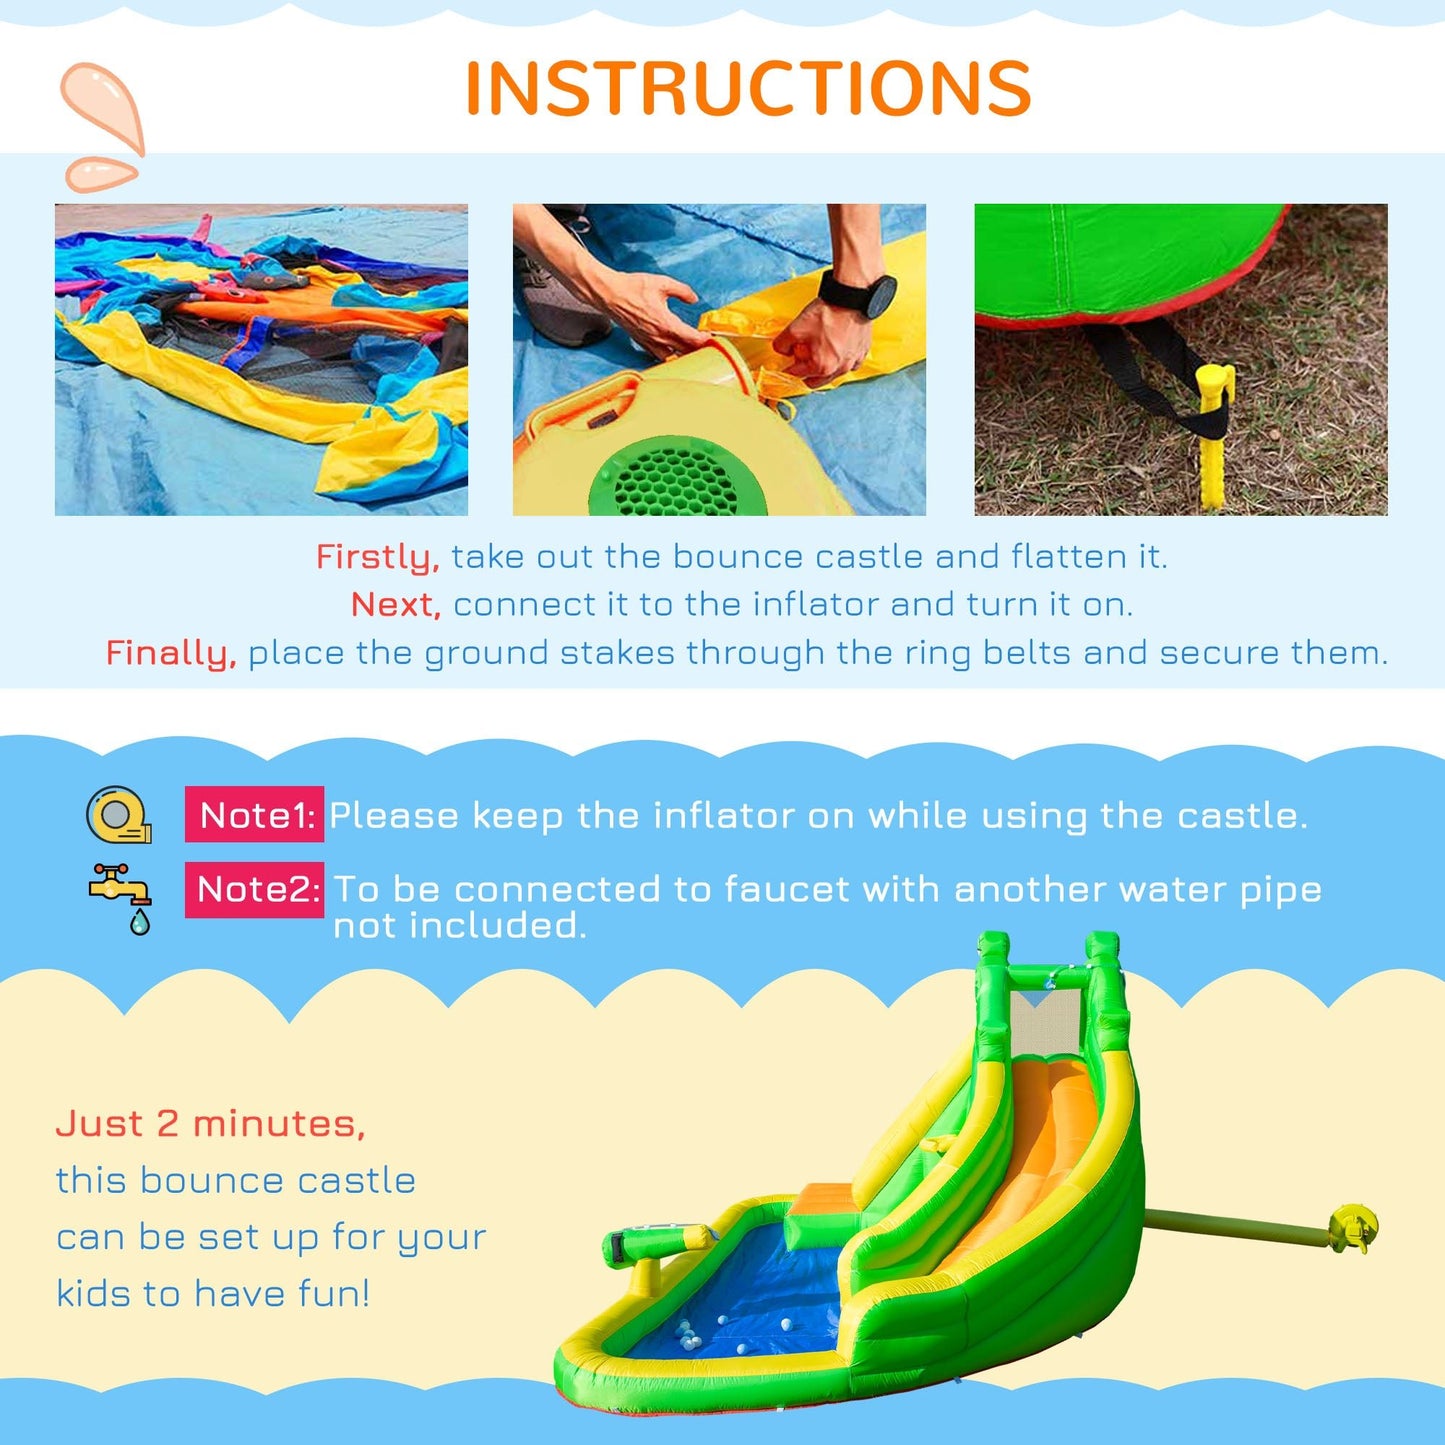 Miscellaneous-6 in 1 Inflatable Water Slide Crocodile Style Water Park Bounce House Castle with Slide, Pool, Basket, Climbing Wall, Include Air Blower - Outdoor Style Company